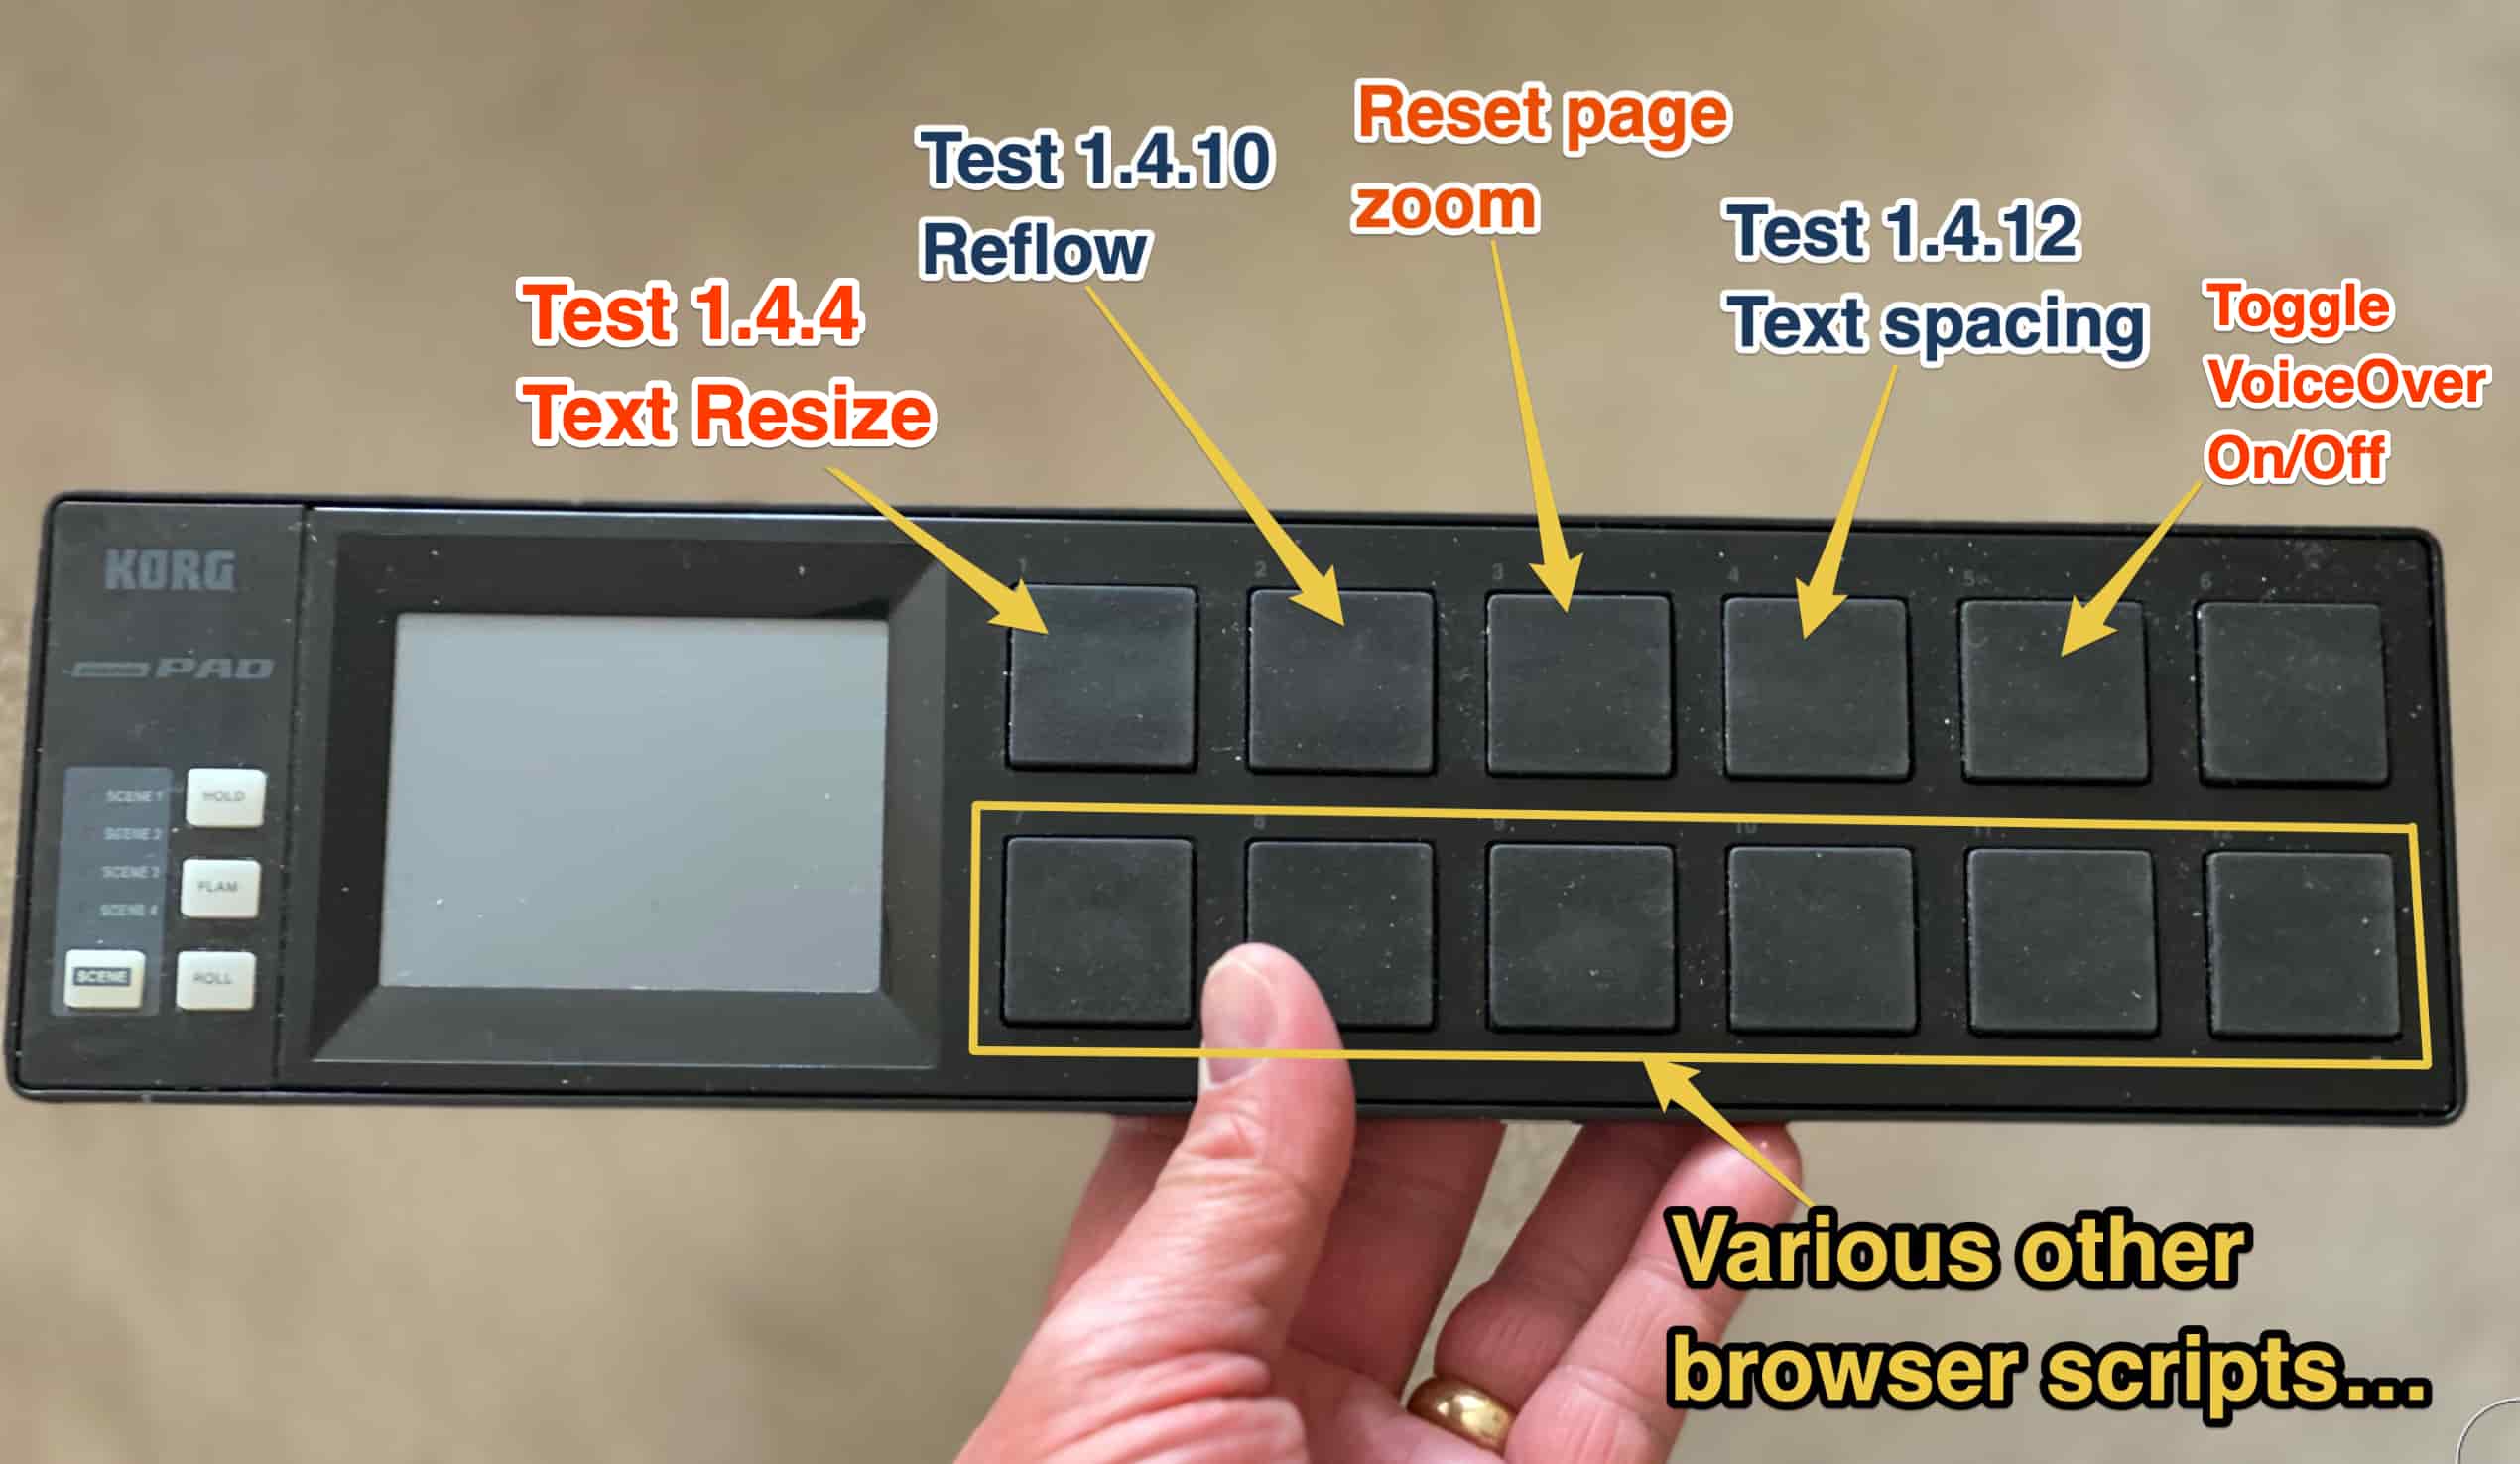 Korg nanoPAD with annotations for multiple buttons indicating that they trigger browser scripts or set up the browser for specific WCAG tests